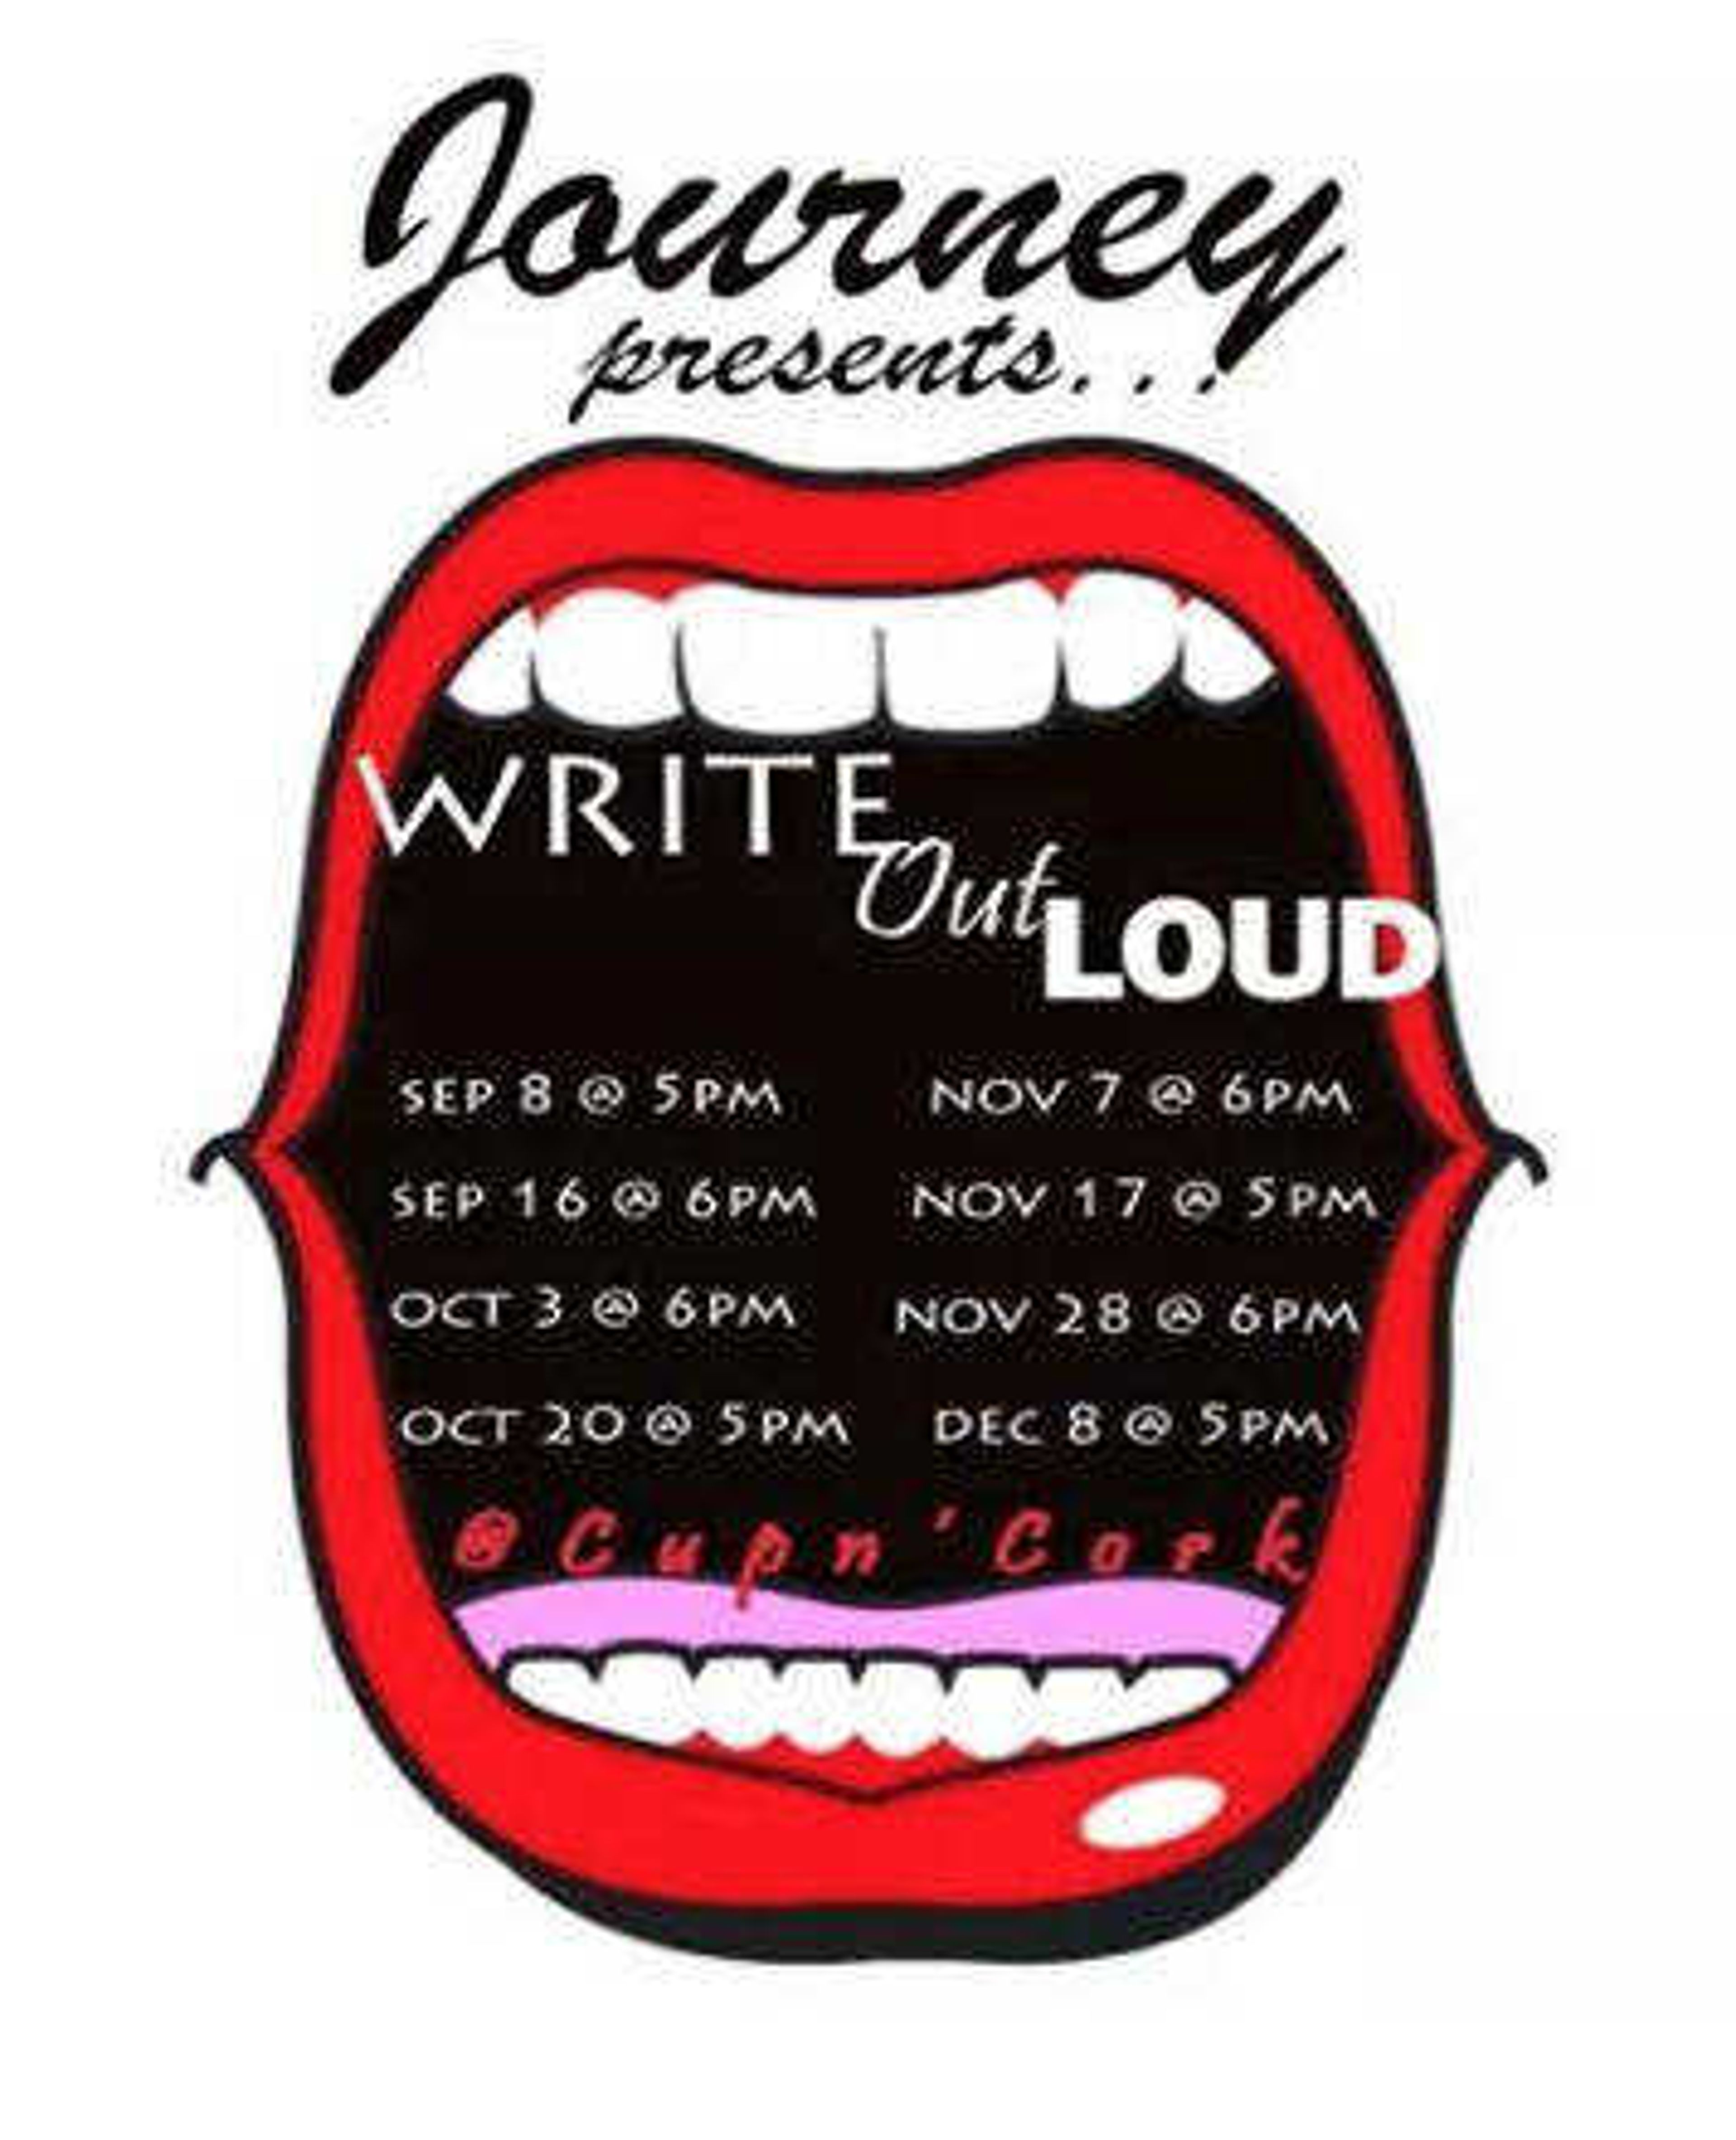 "Write out Loud" winds down their semester of events